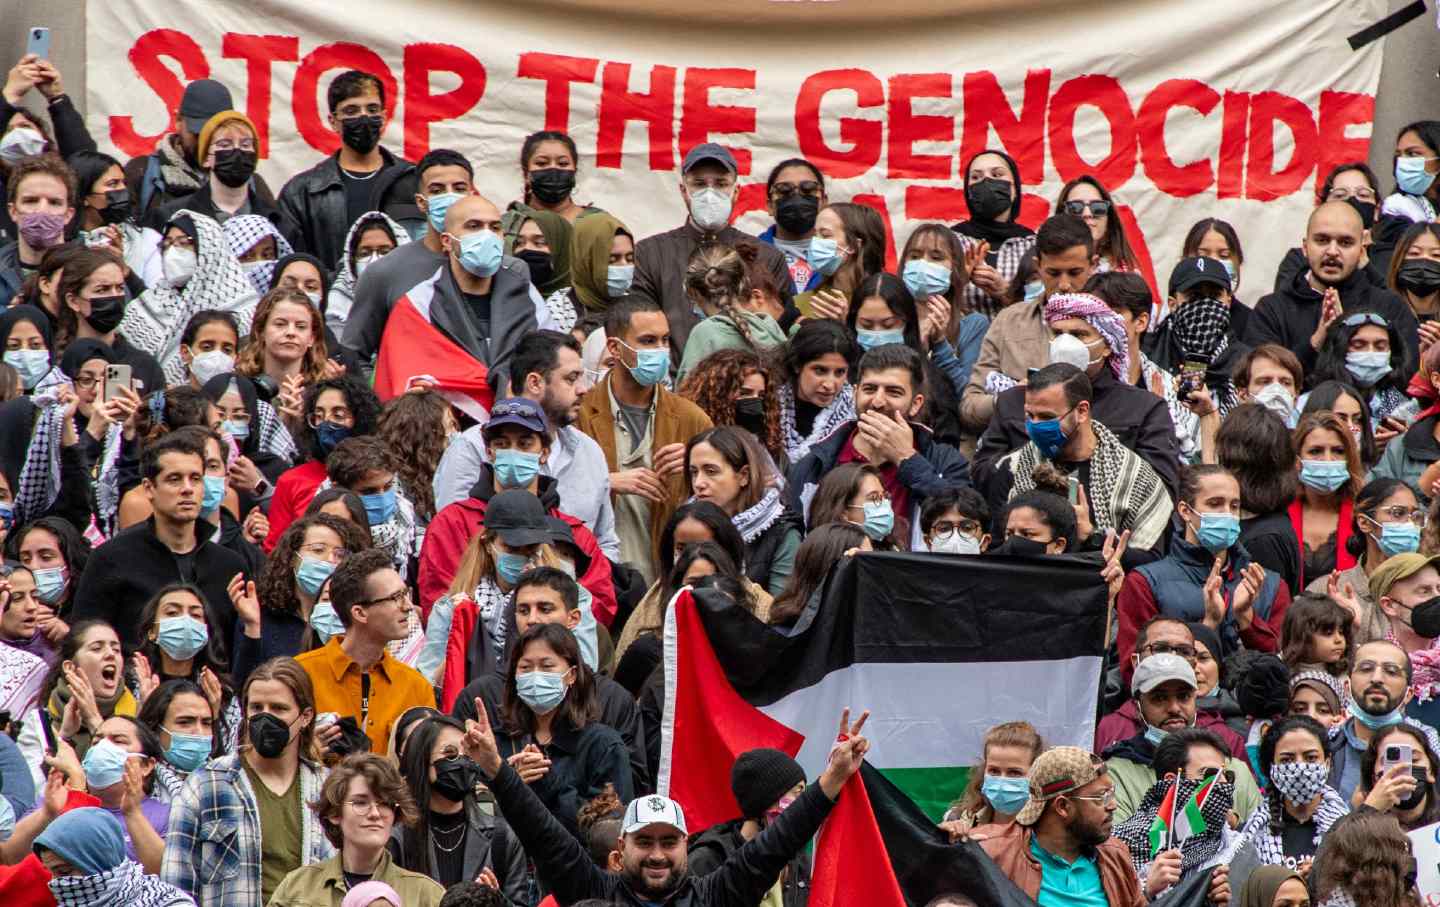 A crowd of people stands in front of a banner reading "Stop the genocide"